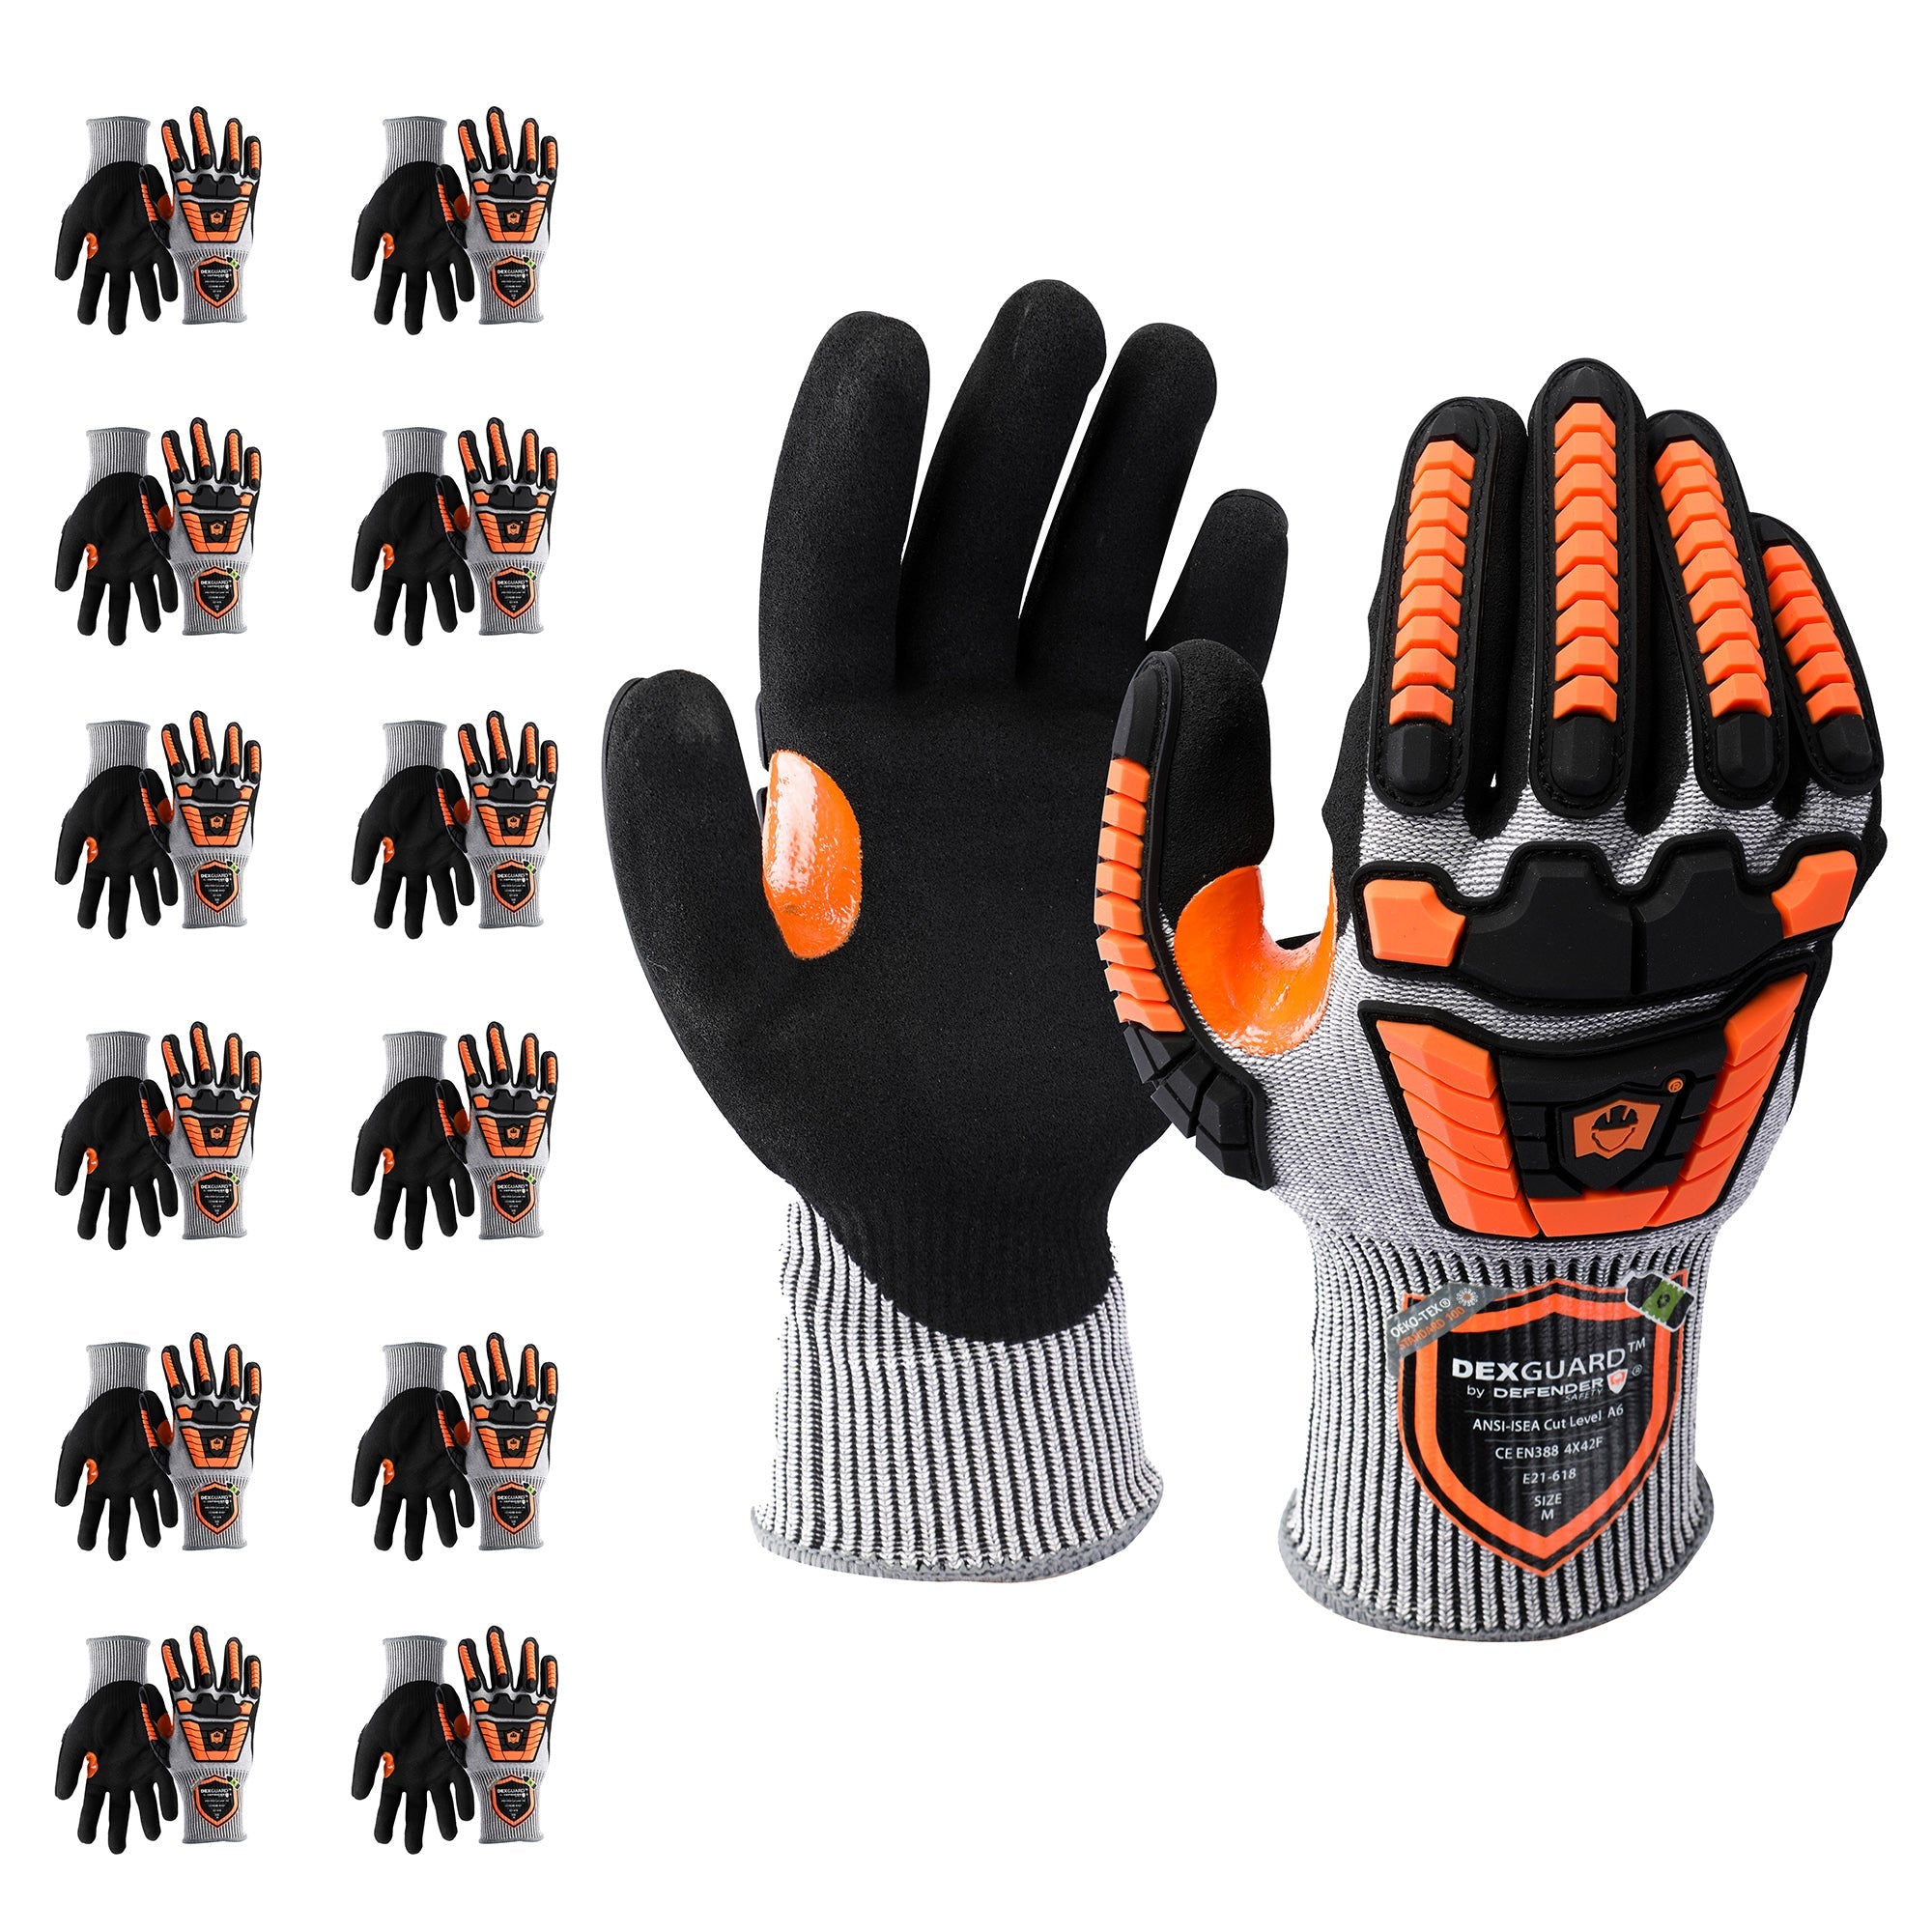 https://defendersafety.com/cdn/shop/products/dexguard-a6-cut-gloves-back-of-the-hand-impact-resistant-level-4-abrasion-resistant-textured-nitrile-coating-753293.jpg?v=1692319923&width=2000